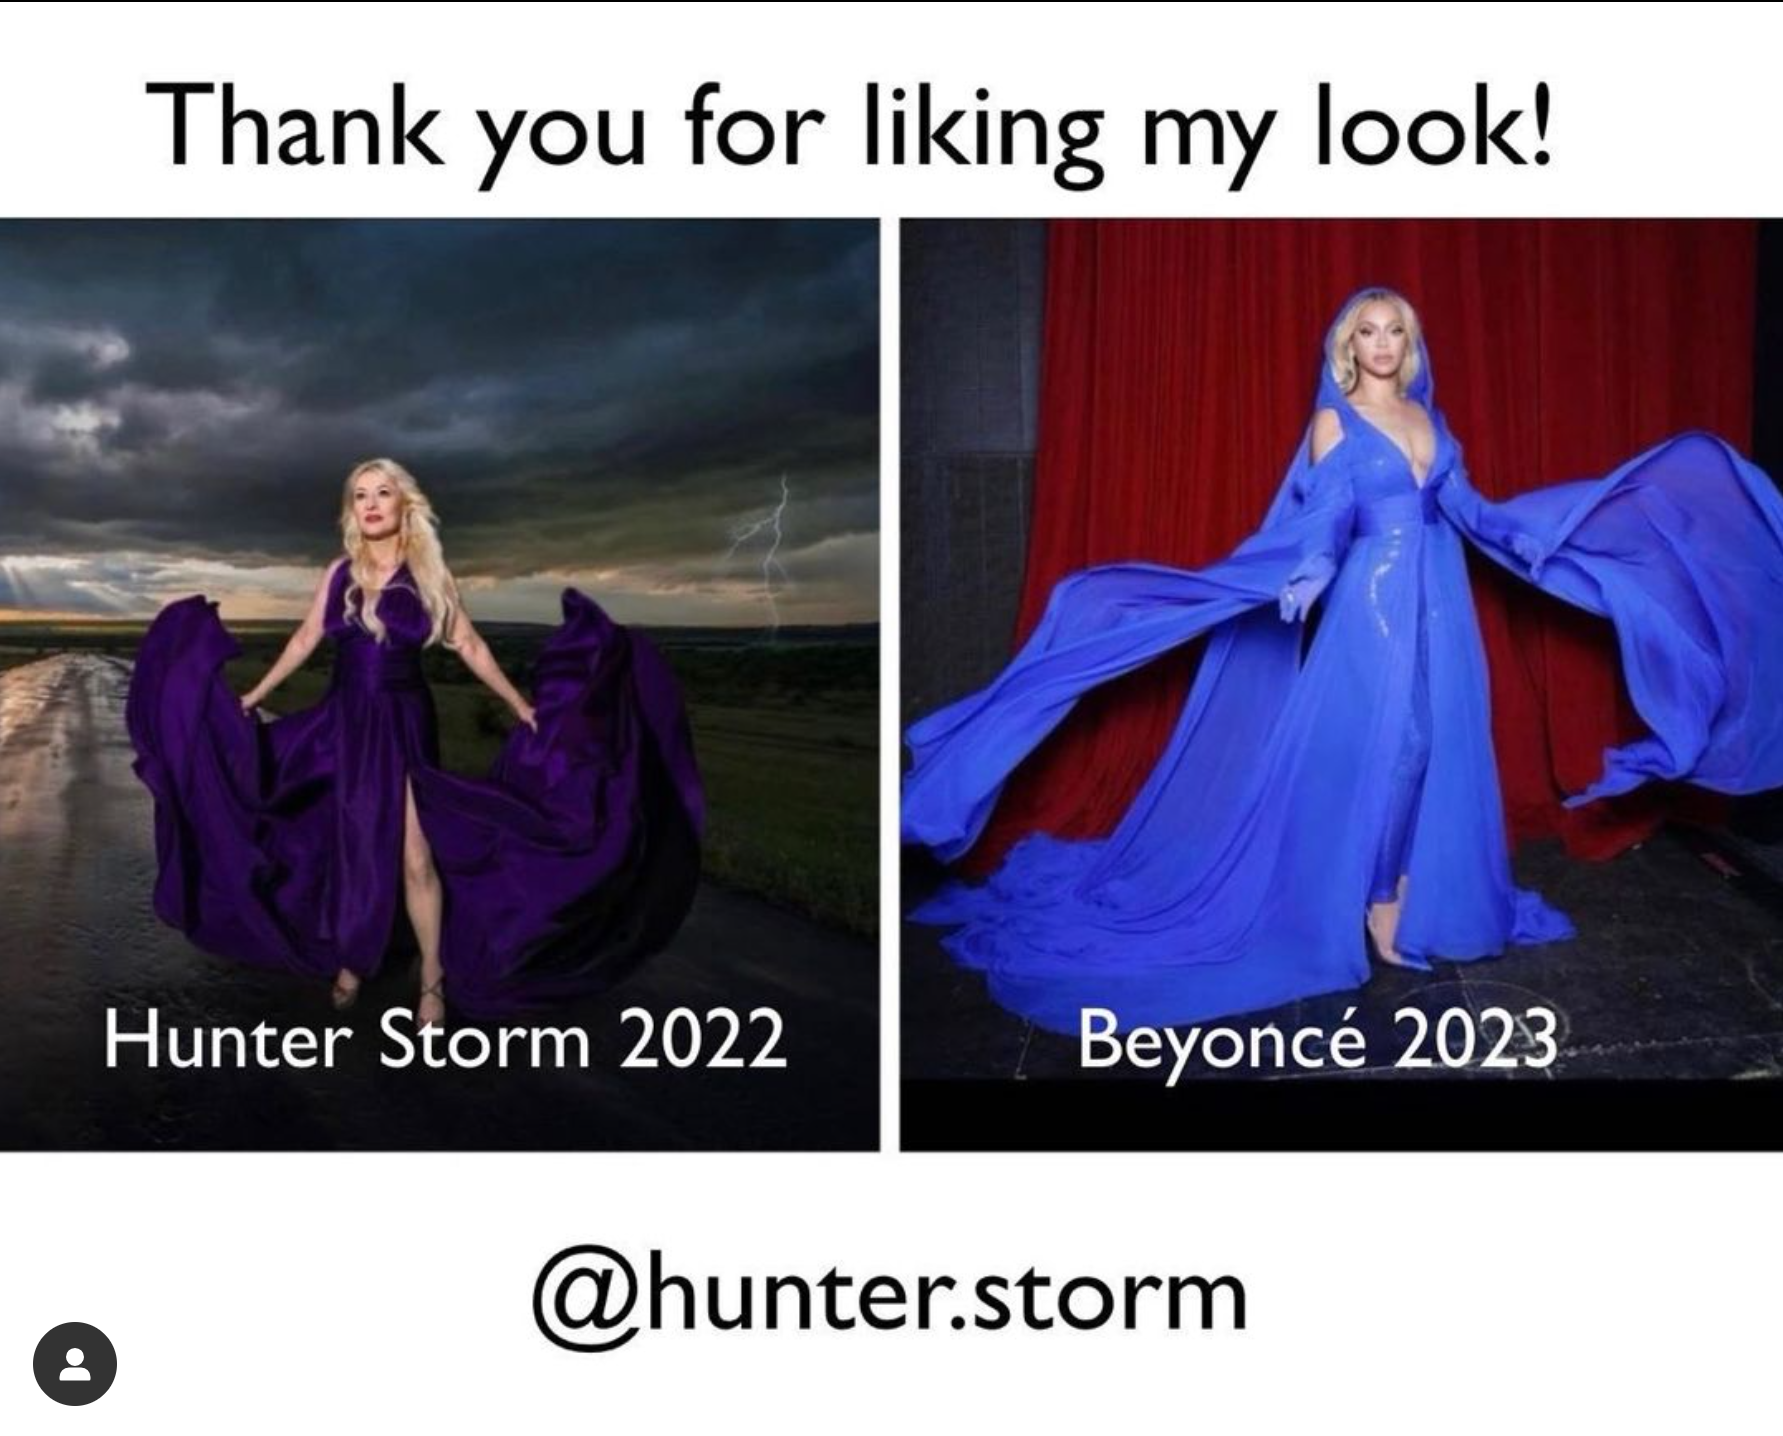 Image comparing Hunter Storm's attire in 2022 with Beyoncé's attire in 2023 side-by-side, with the title "Thank you for liking my look!"